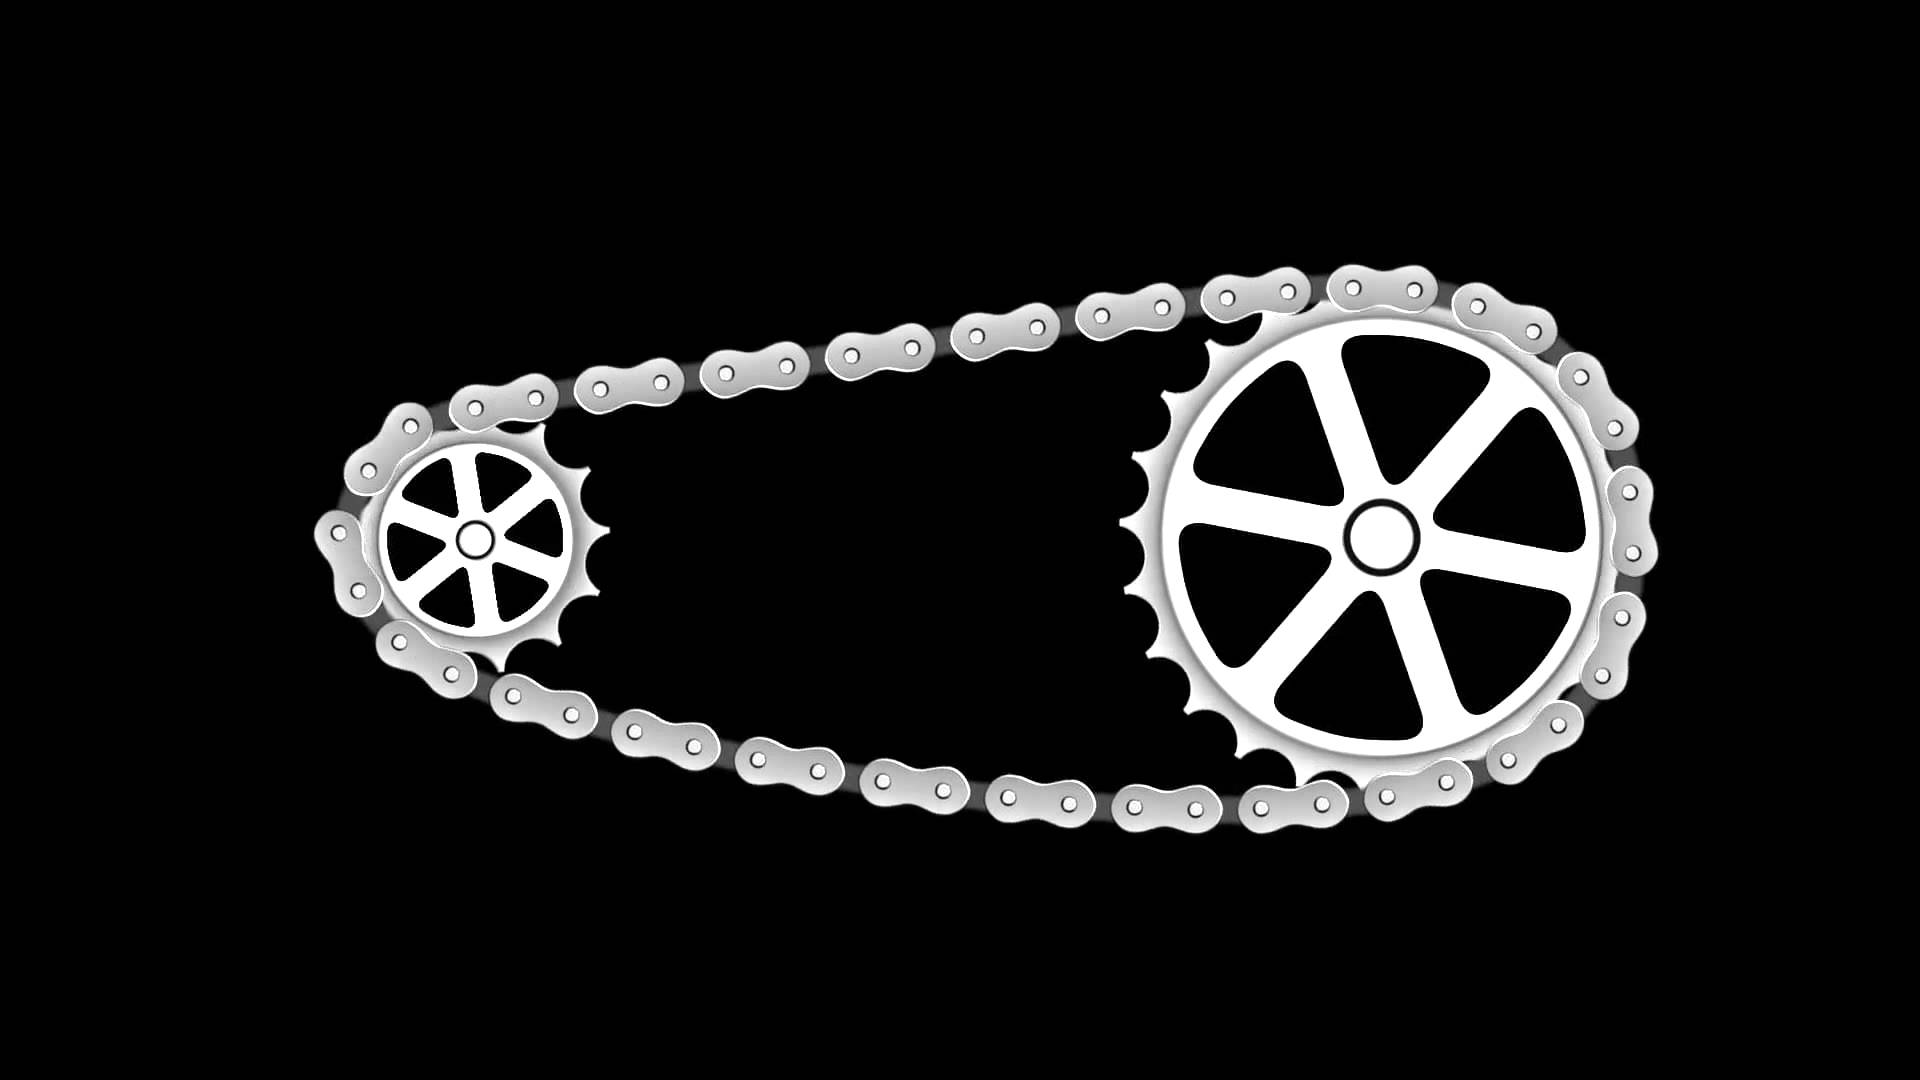 The Bicycle Chain: An Apple Motion Project - YouTube